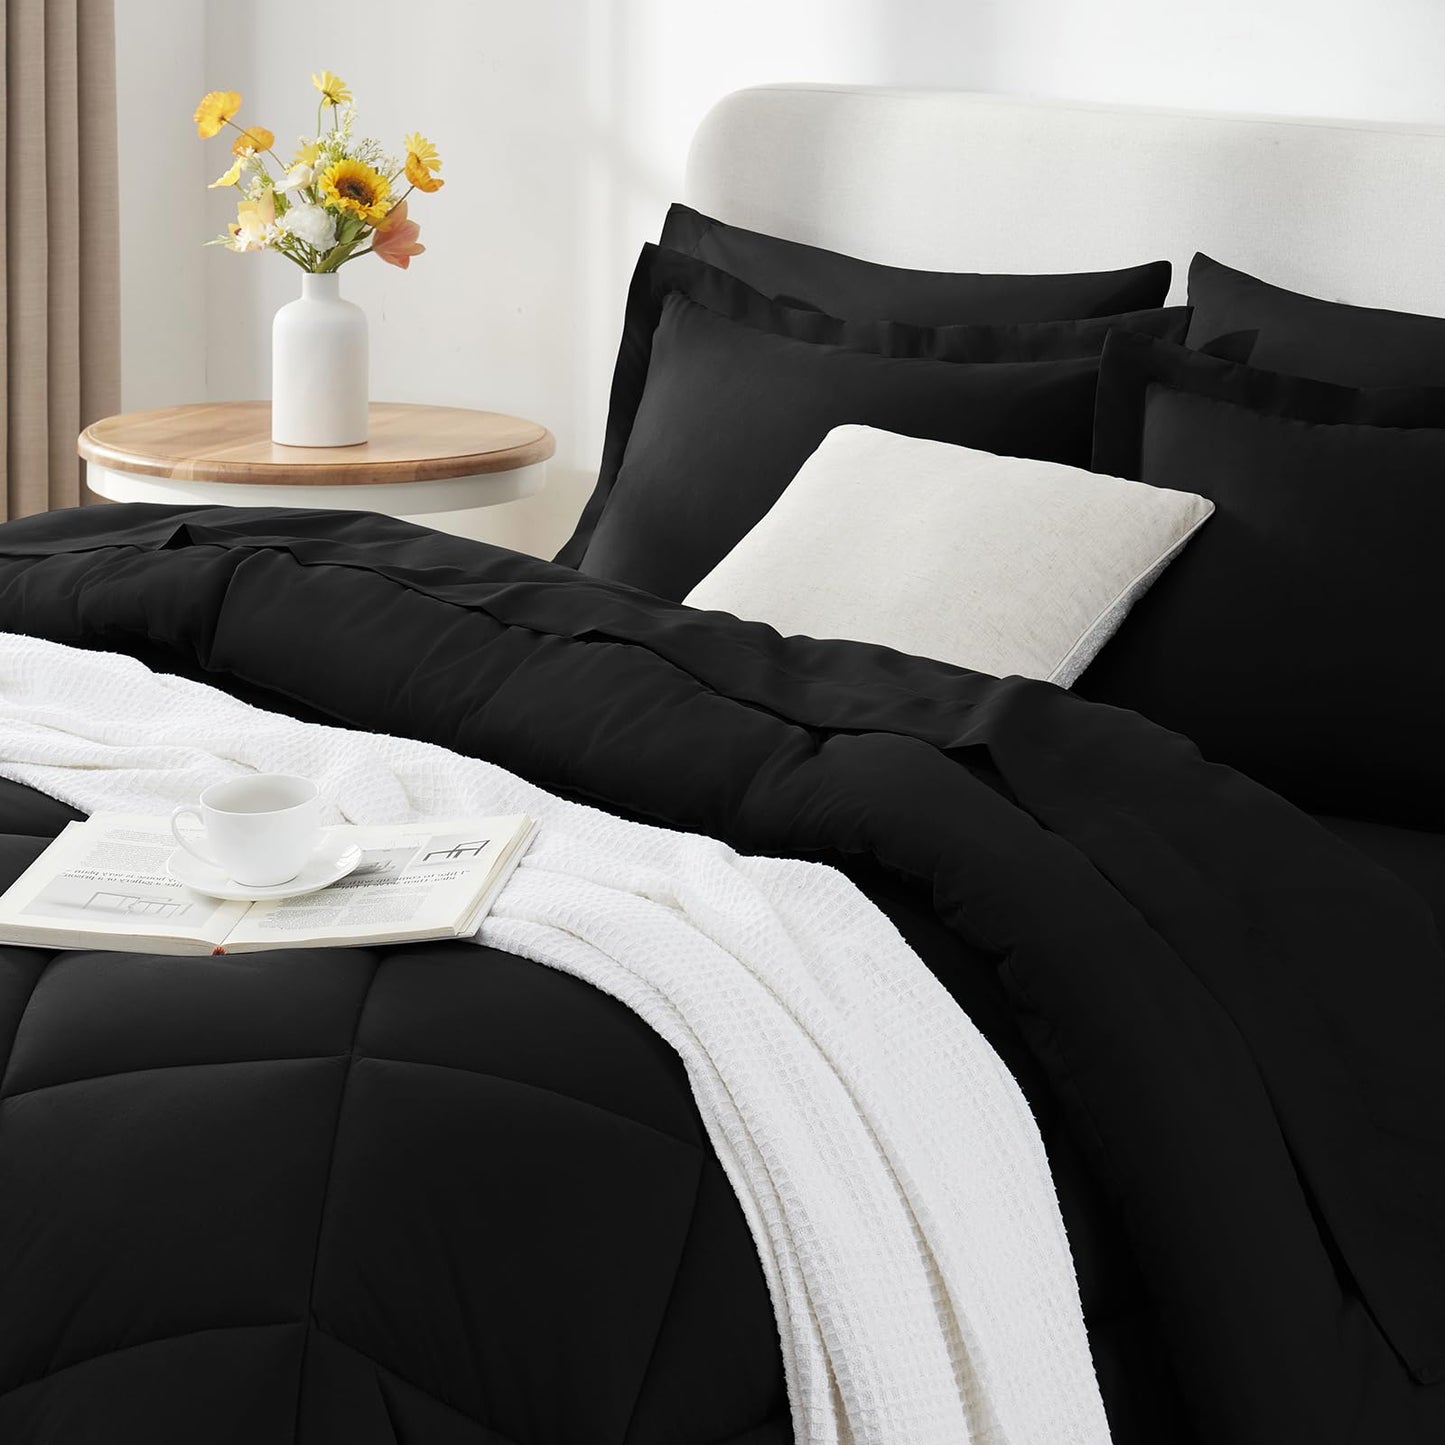 CozyLux Twin XL Size Comforter Set 5 Pieces Black Twin Extra Long Bed in a Bag for College Dorm All Season Bedding Sets with Comforter, Pillow Shams, Flat Sheet, Fitted Sheet and Pillowcases